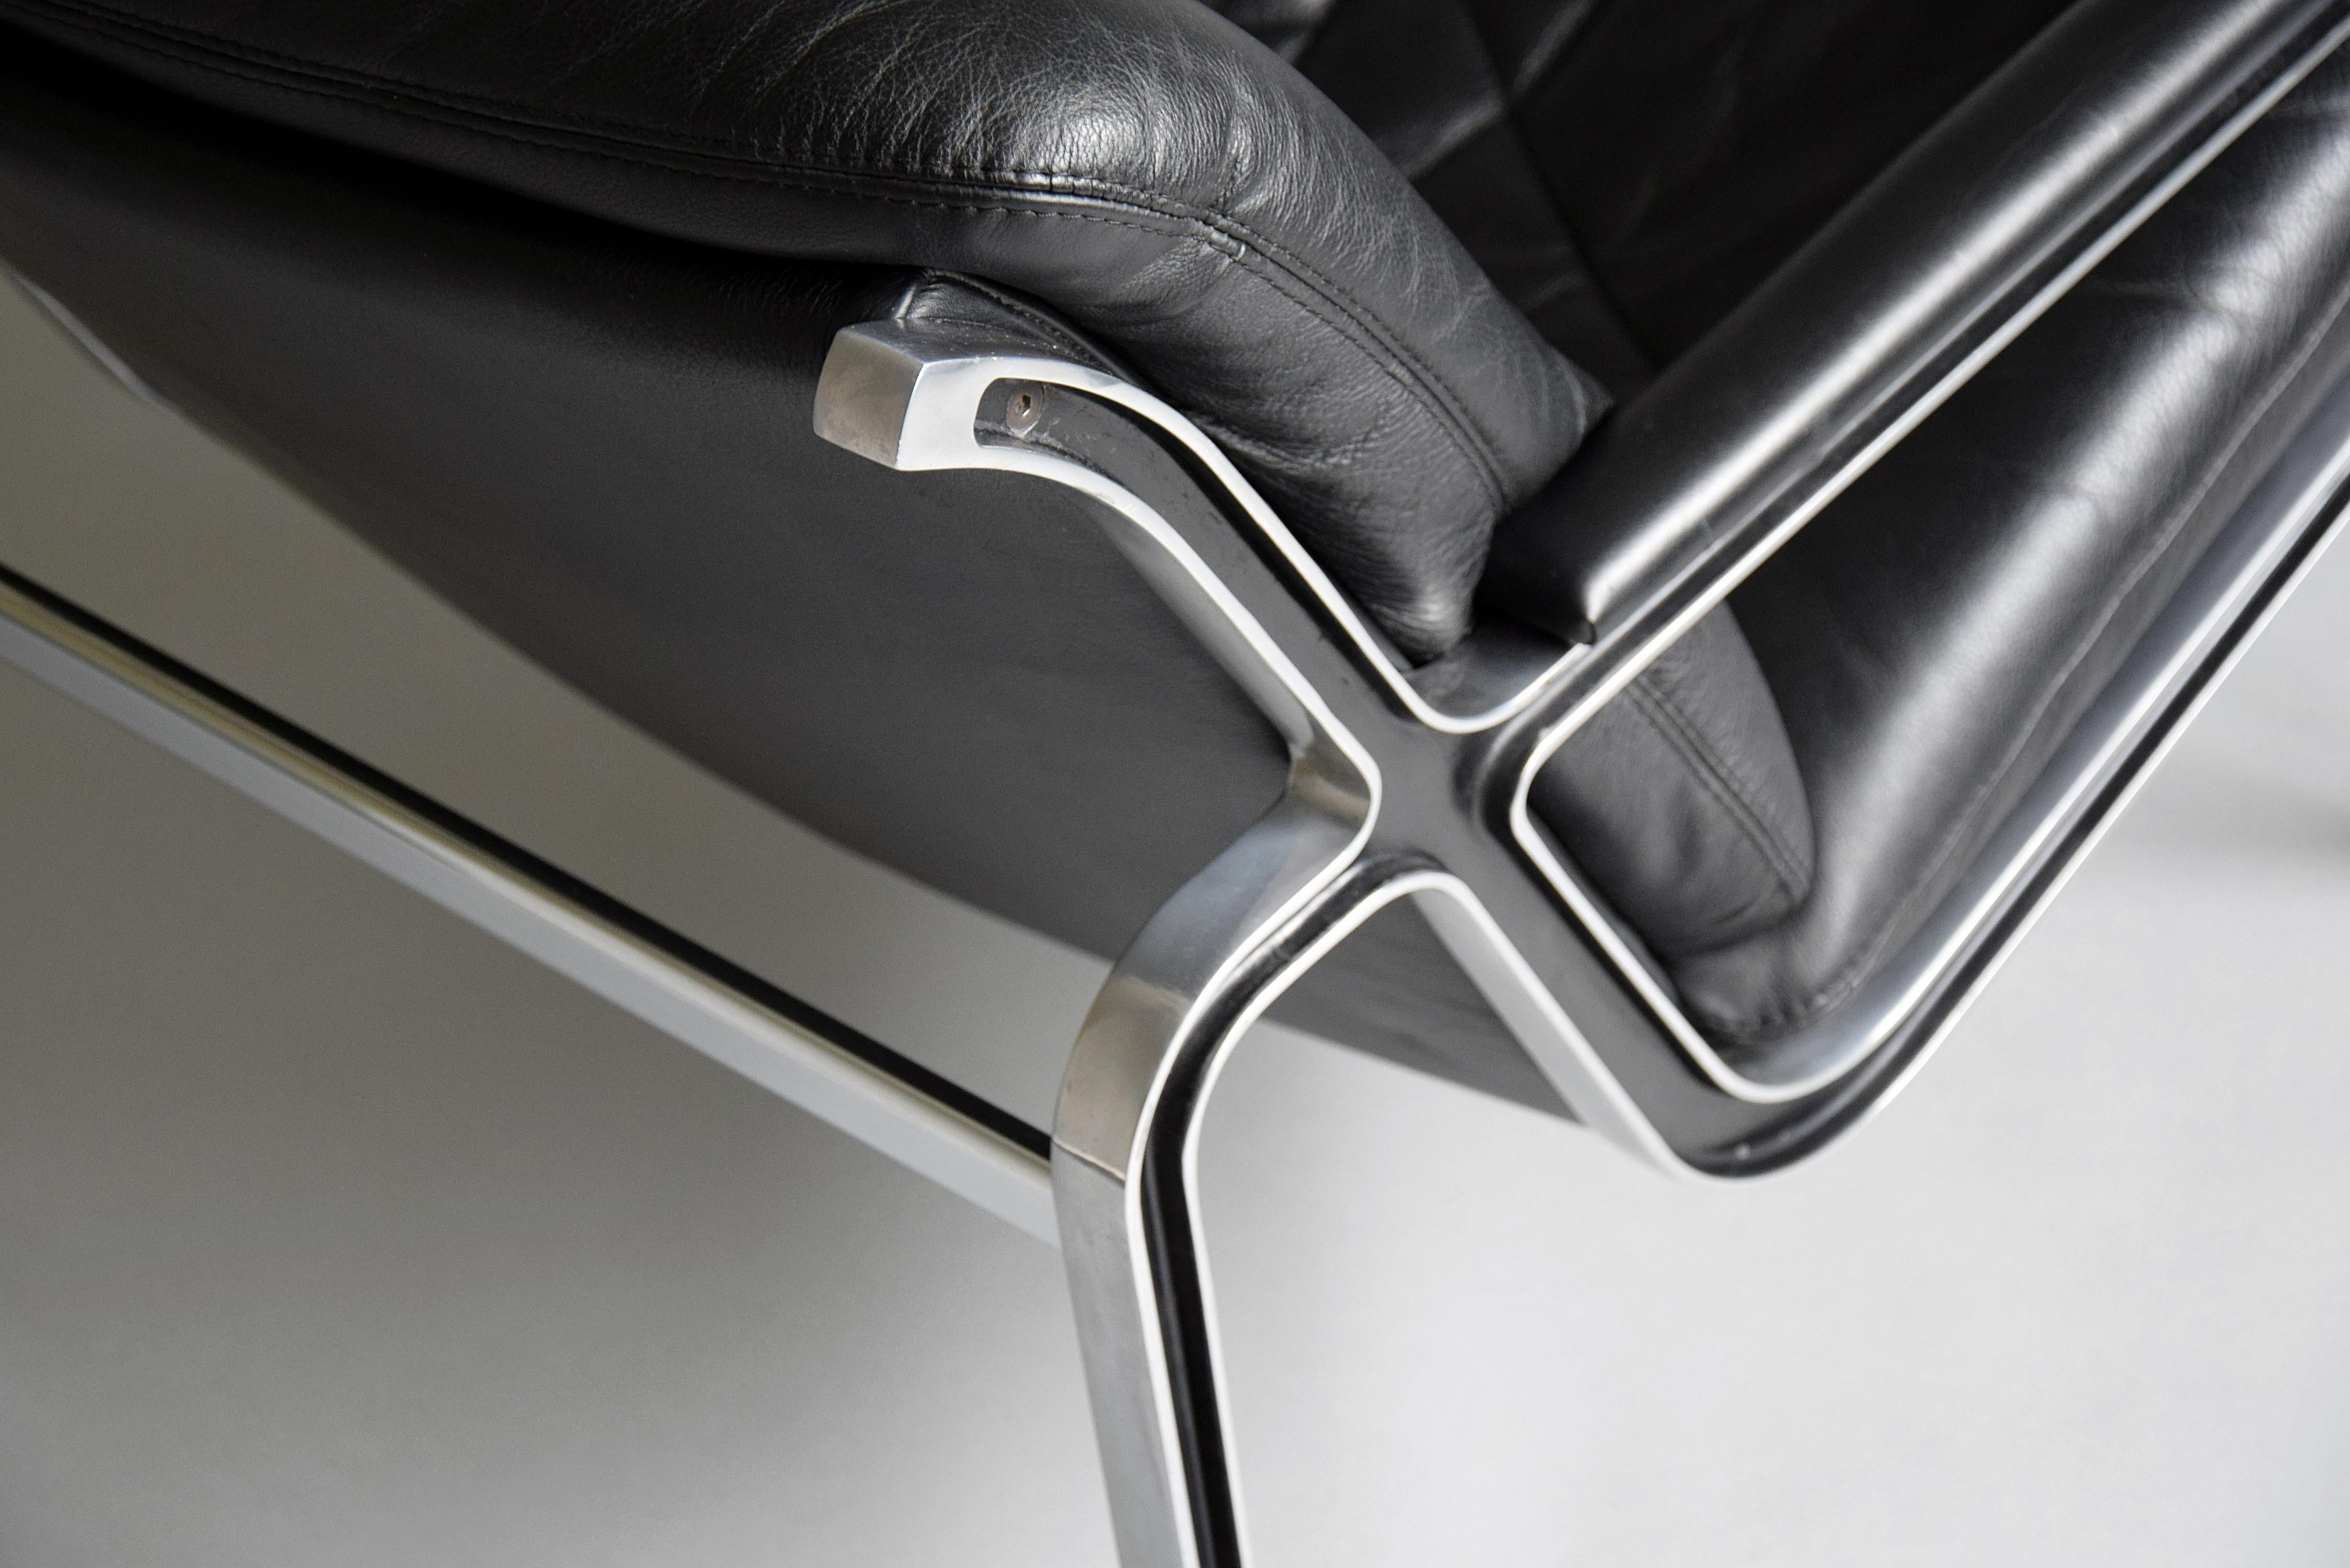 Introducing the ultimate lounge chair for the discerning collector: the 1960's Swiss high-quality designed cast aluminum and black leather Aluline lounge chair. Crafted with the highest attention to detail by Strässle International and designed by